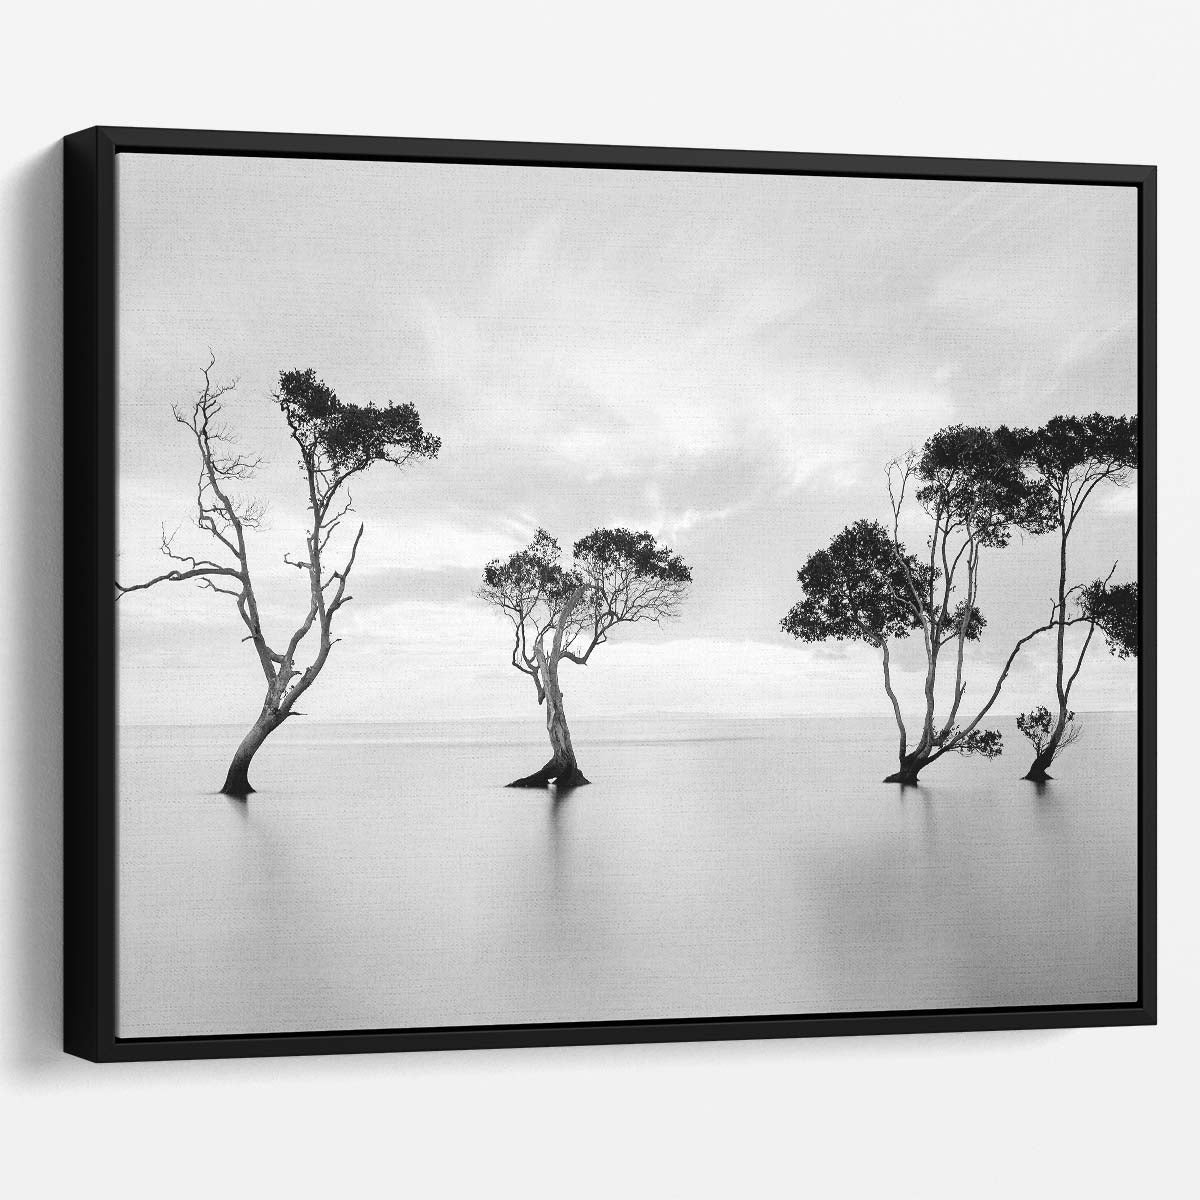 Serene Moreton Bay Trees Monochrome Seascape Wall Art by Luxuriance Designs. Made in USA.